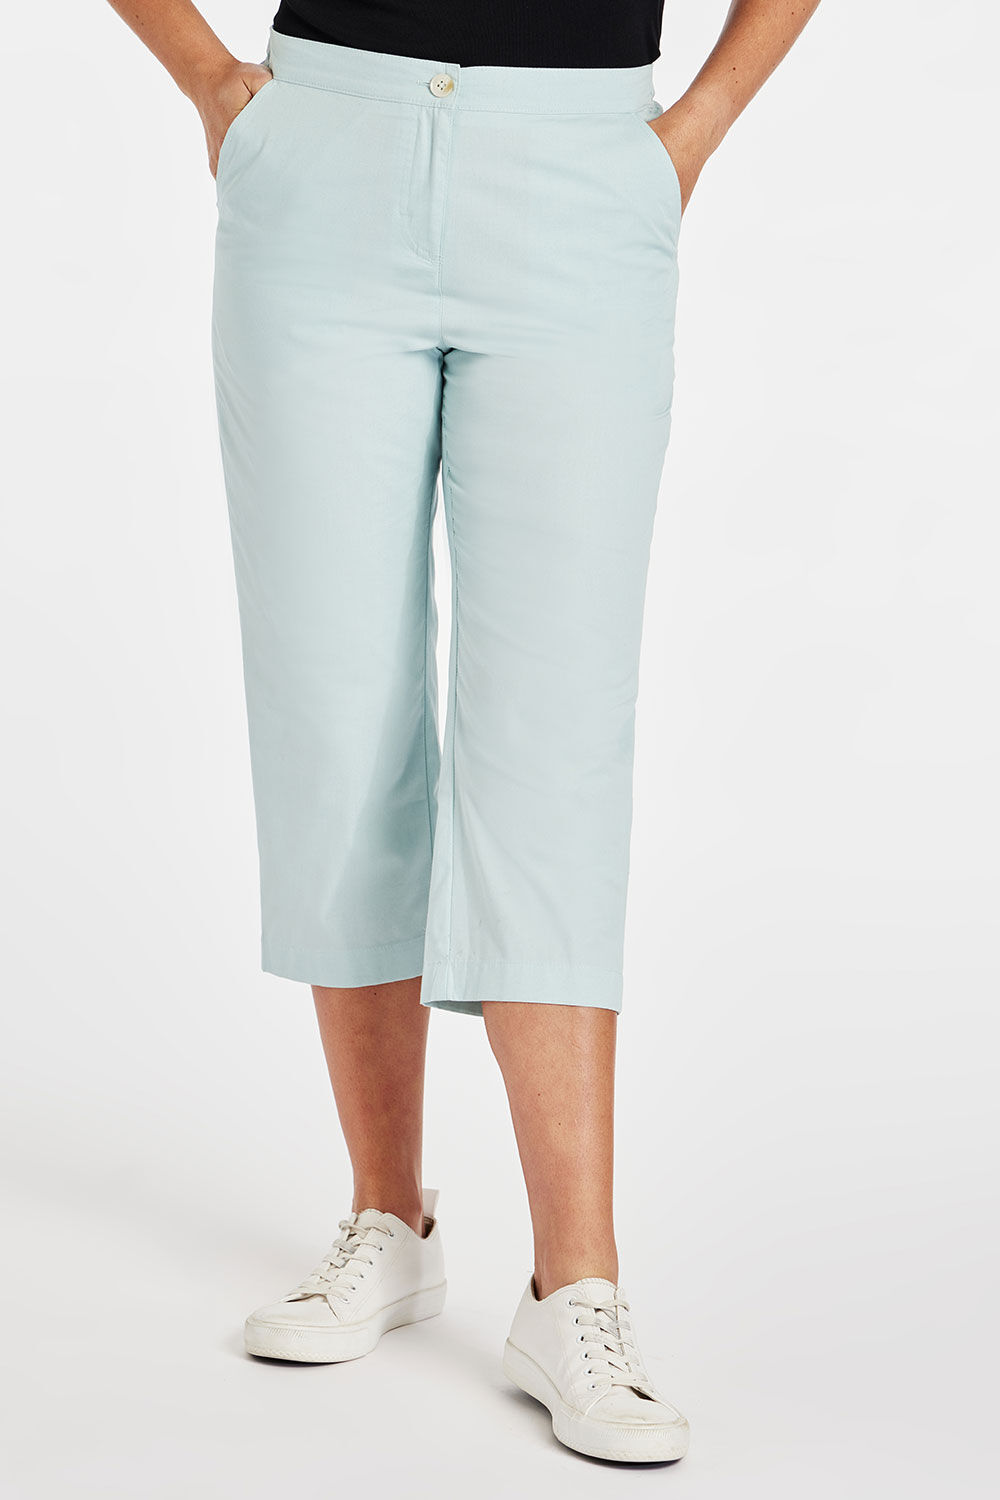 Bonmarche Sage Cropped Elasticated Trousers, Size: 26